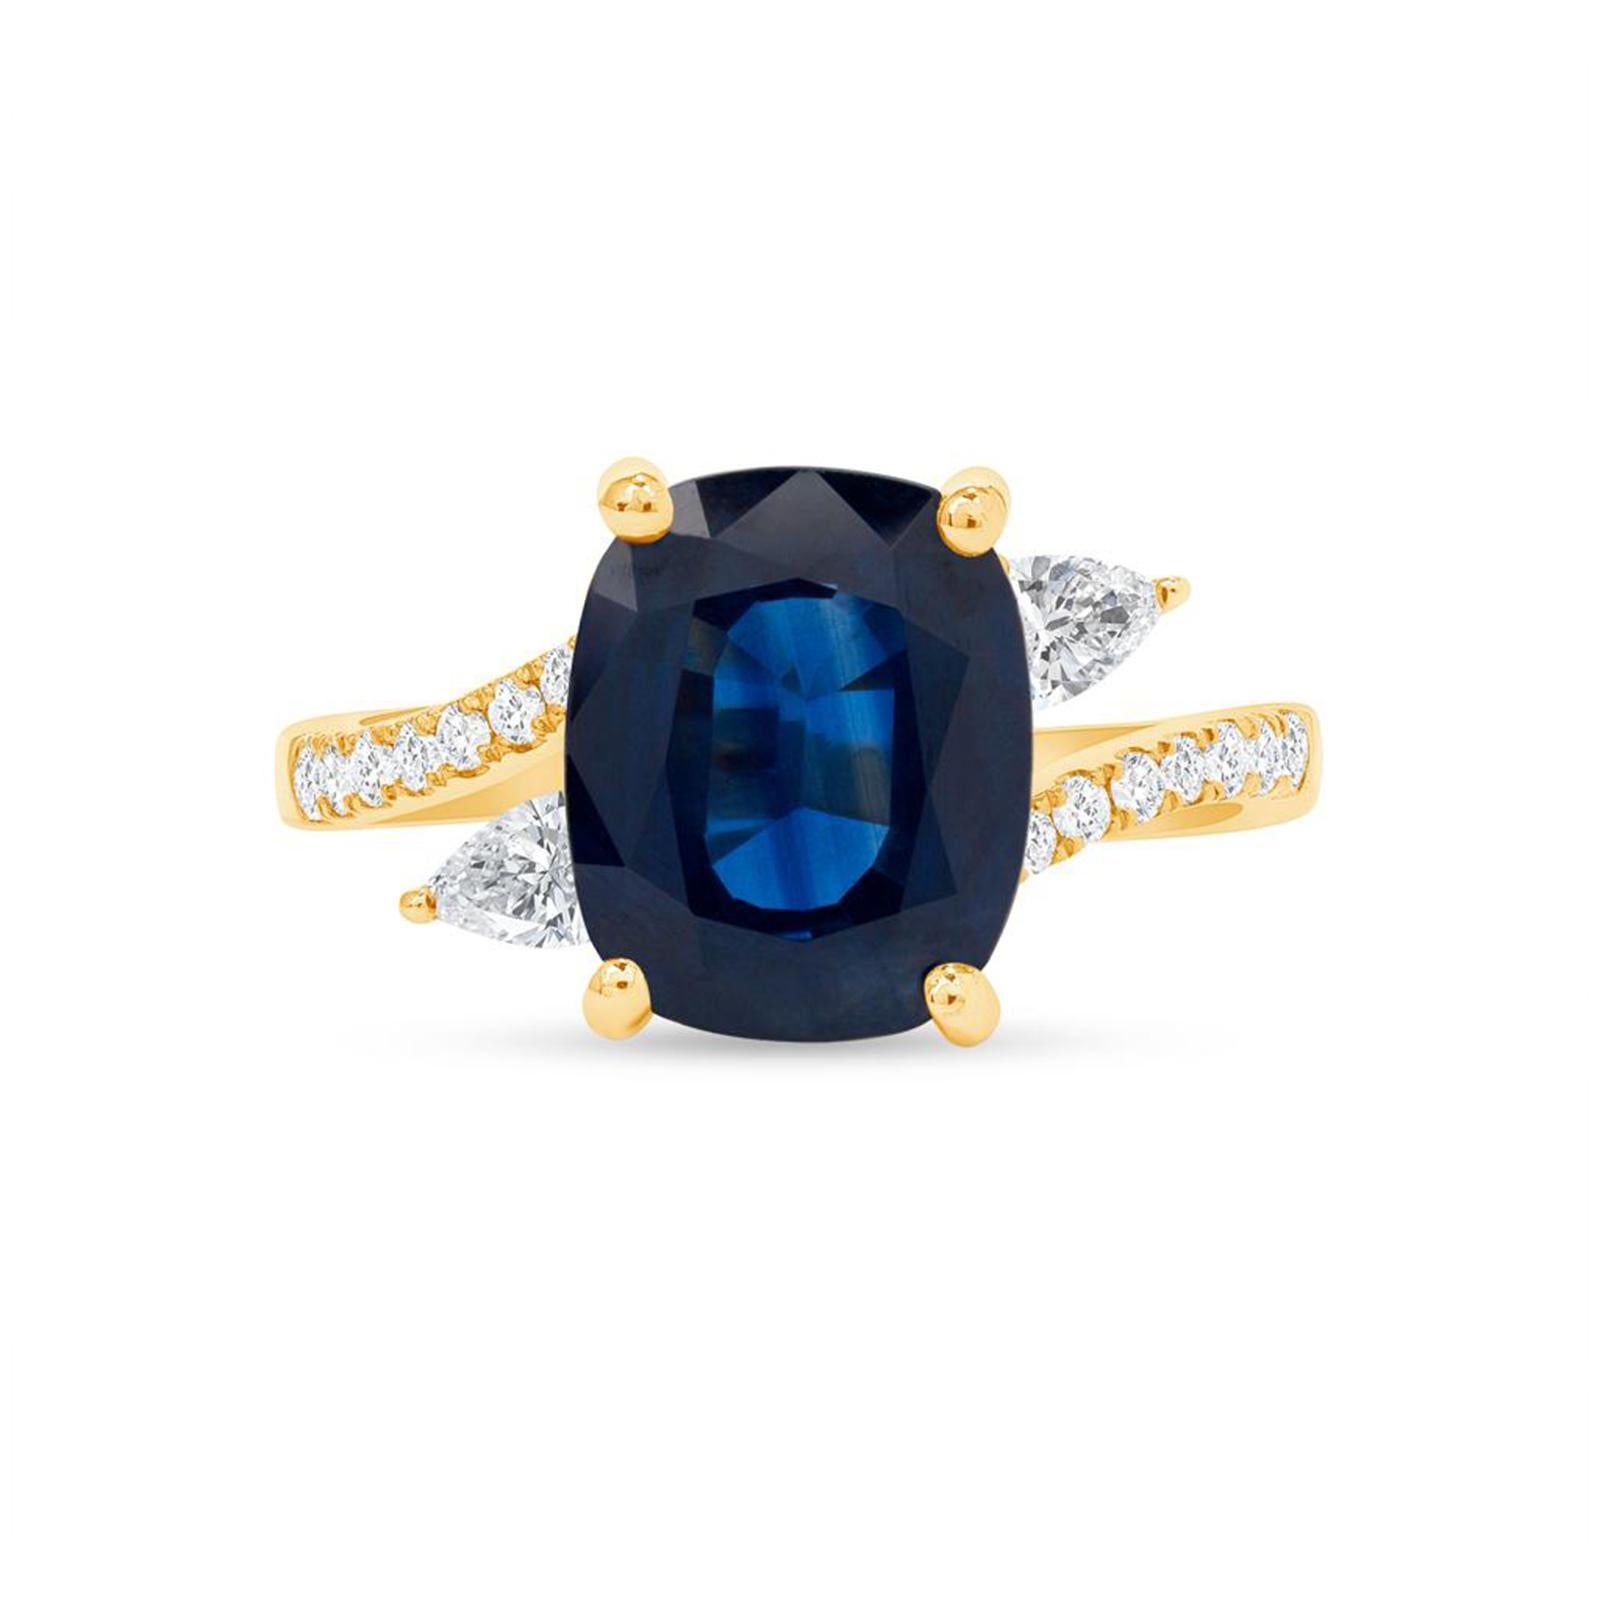 Round Cut 3.65 Ct Sapphire & 0.53 Ct Diamonds in 18K Yellow Gold Engagement Ring For Sale